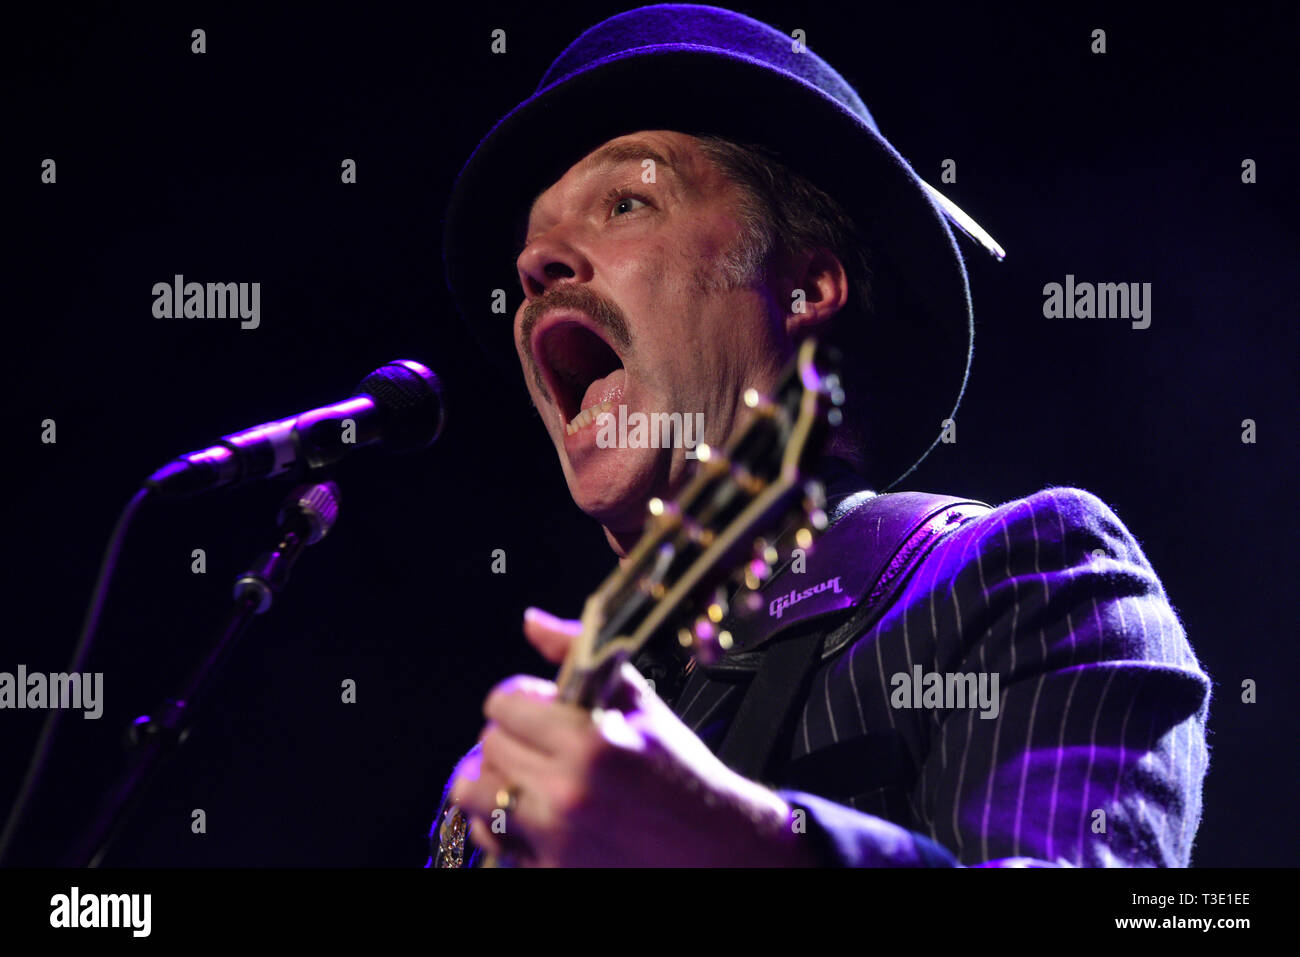 American, Canadian singer Rufus Wainwright, a 45 year-old, is seen performing live during his concert 'All These Poses Tour' at Teatro Nuevo Apolo in Madrid. Stock Photo